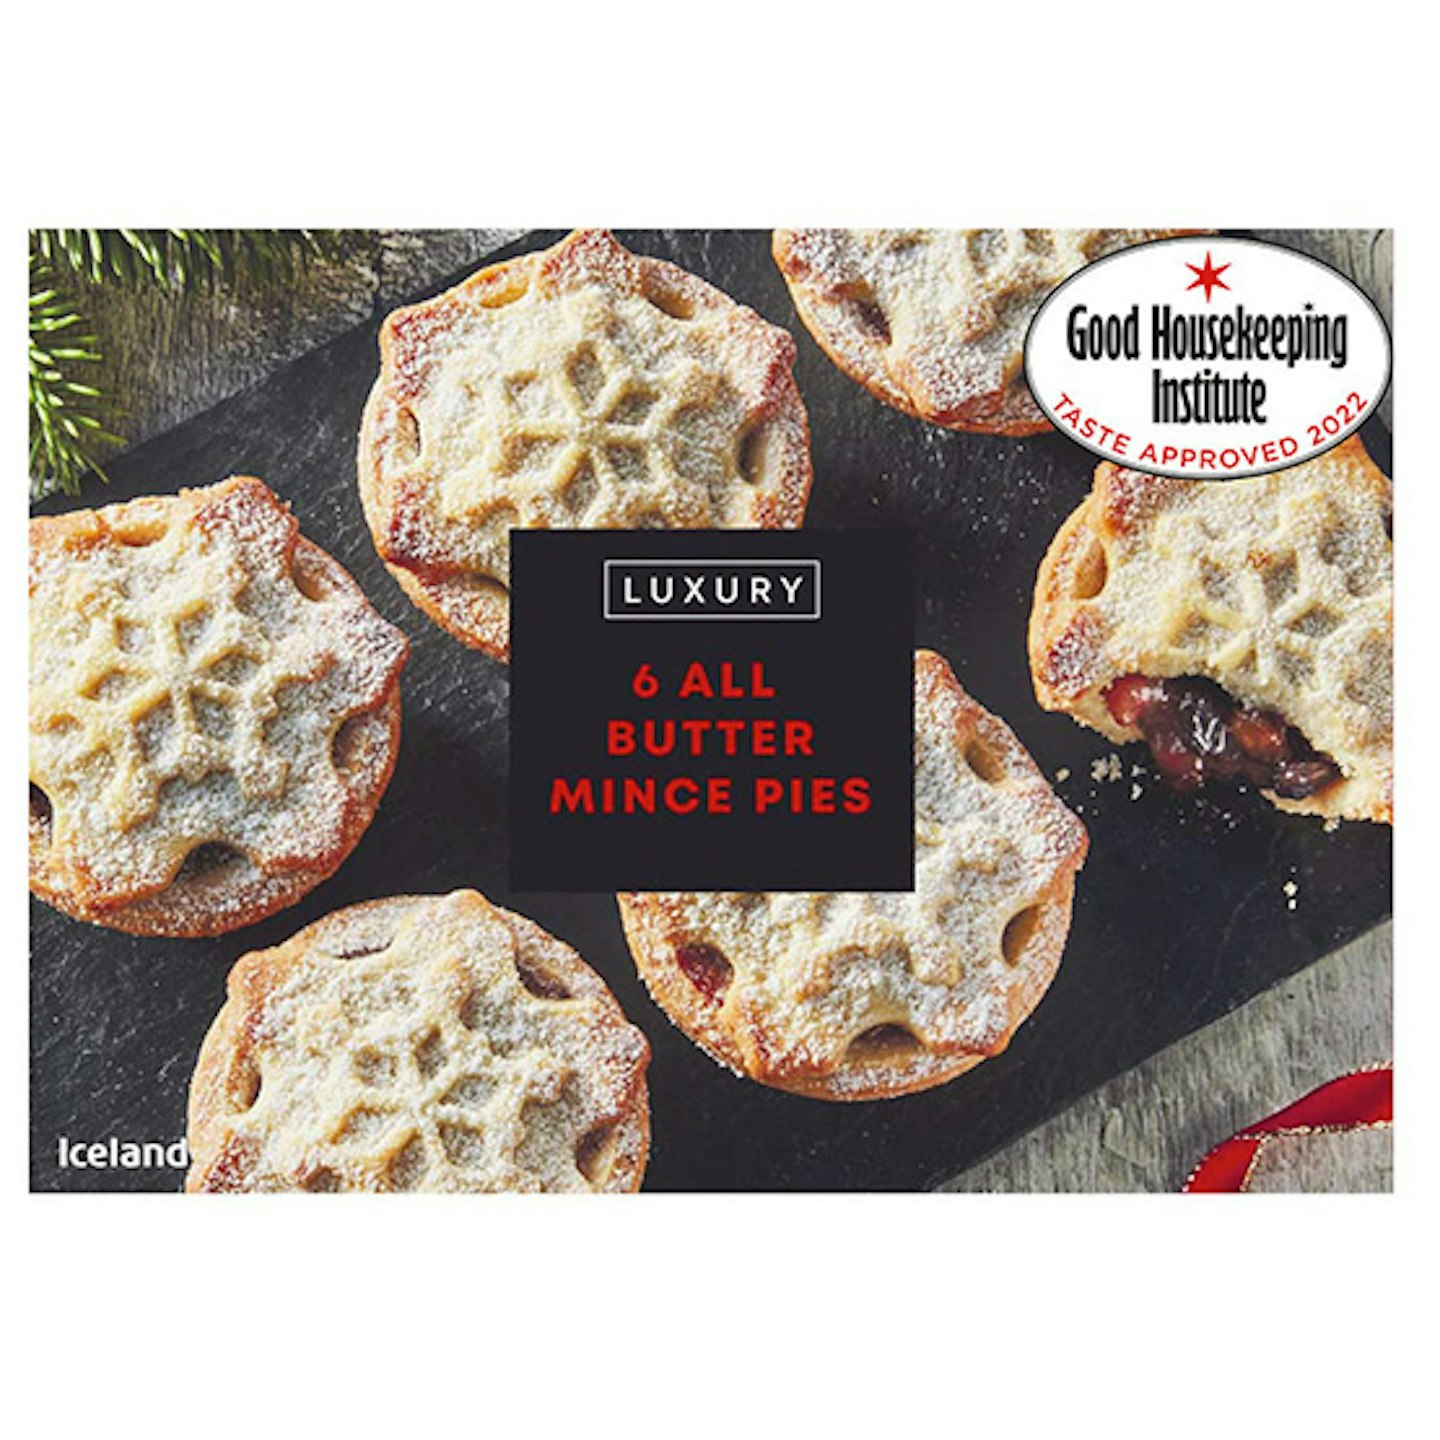 iceland_luxury_6_all_butter_mince_pies_56837